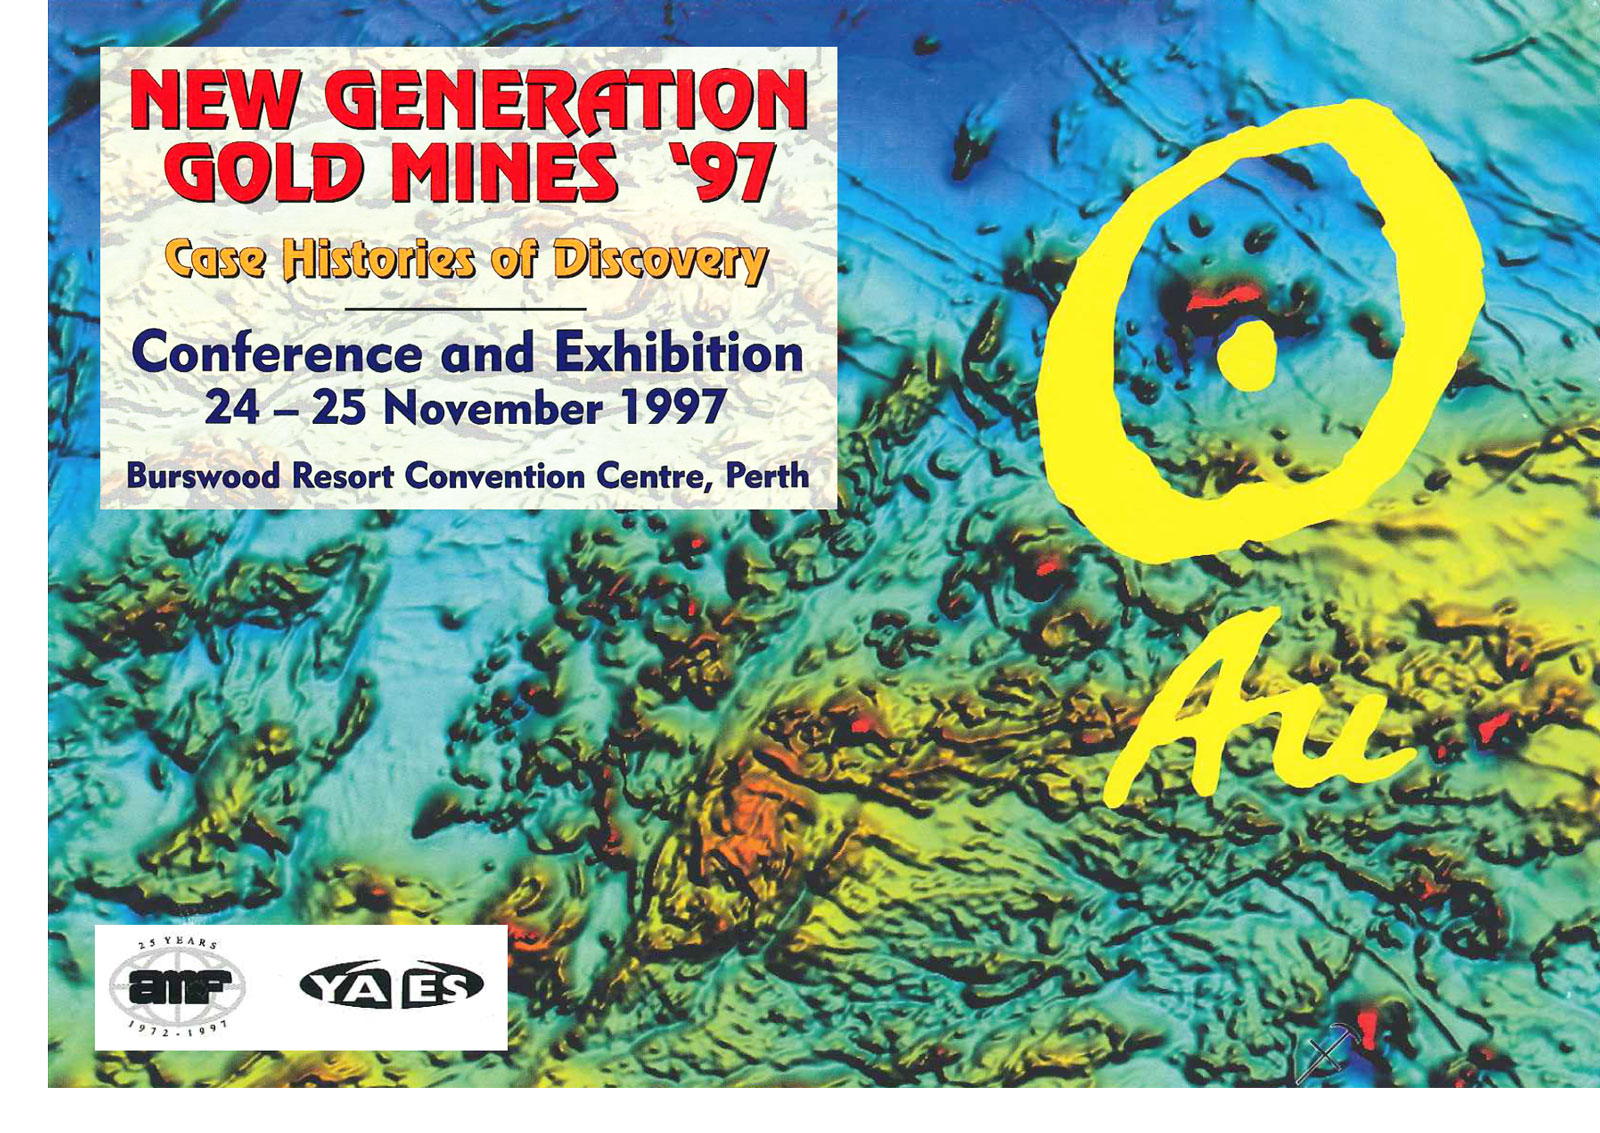 New Generations Gold Mines 97 Conference